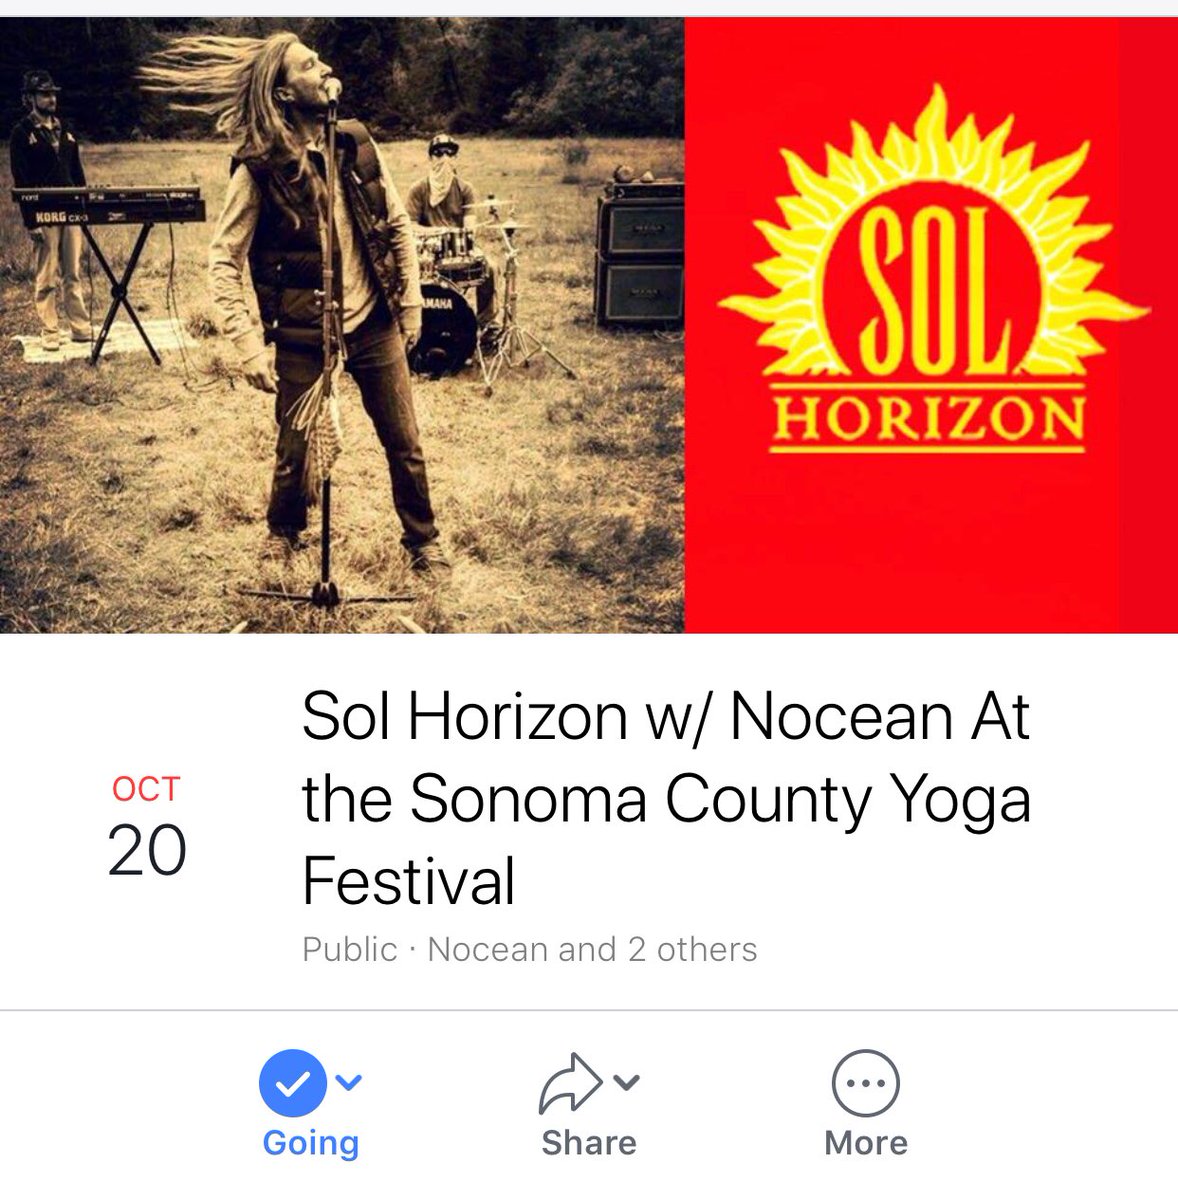 You don’t want to miss this epic performance!! Come jam with us on Saturday Night, at the Sonoma County Yoga Festival!
@nocean @sonomacounty_yogafest @somovillage @yoga.cube #nocean #reggea #dub #local #music #yogafestival #yogacommunity #saturdaynight #party